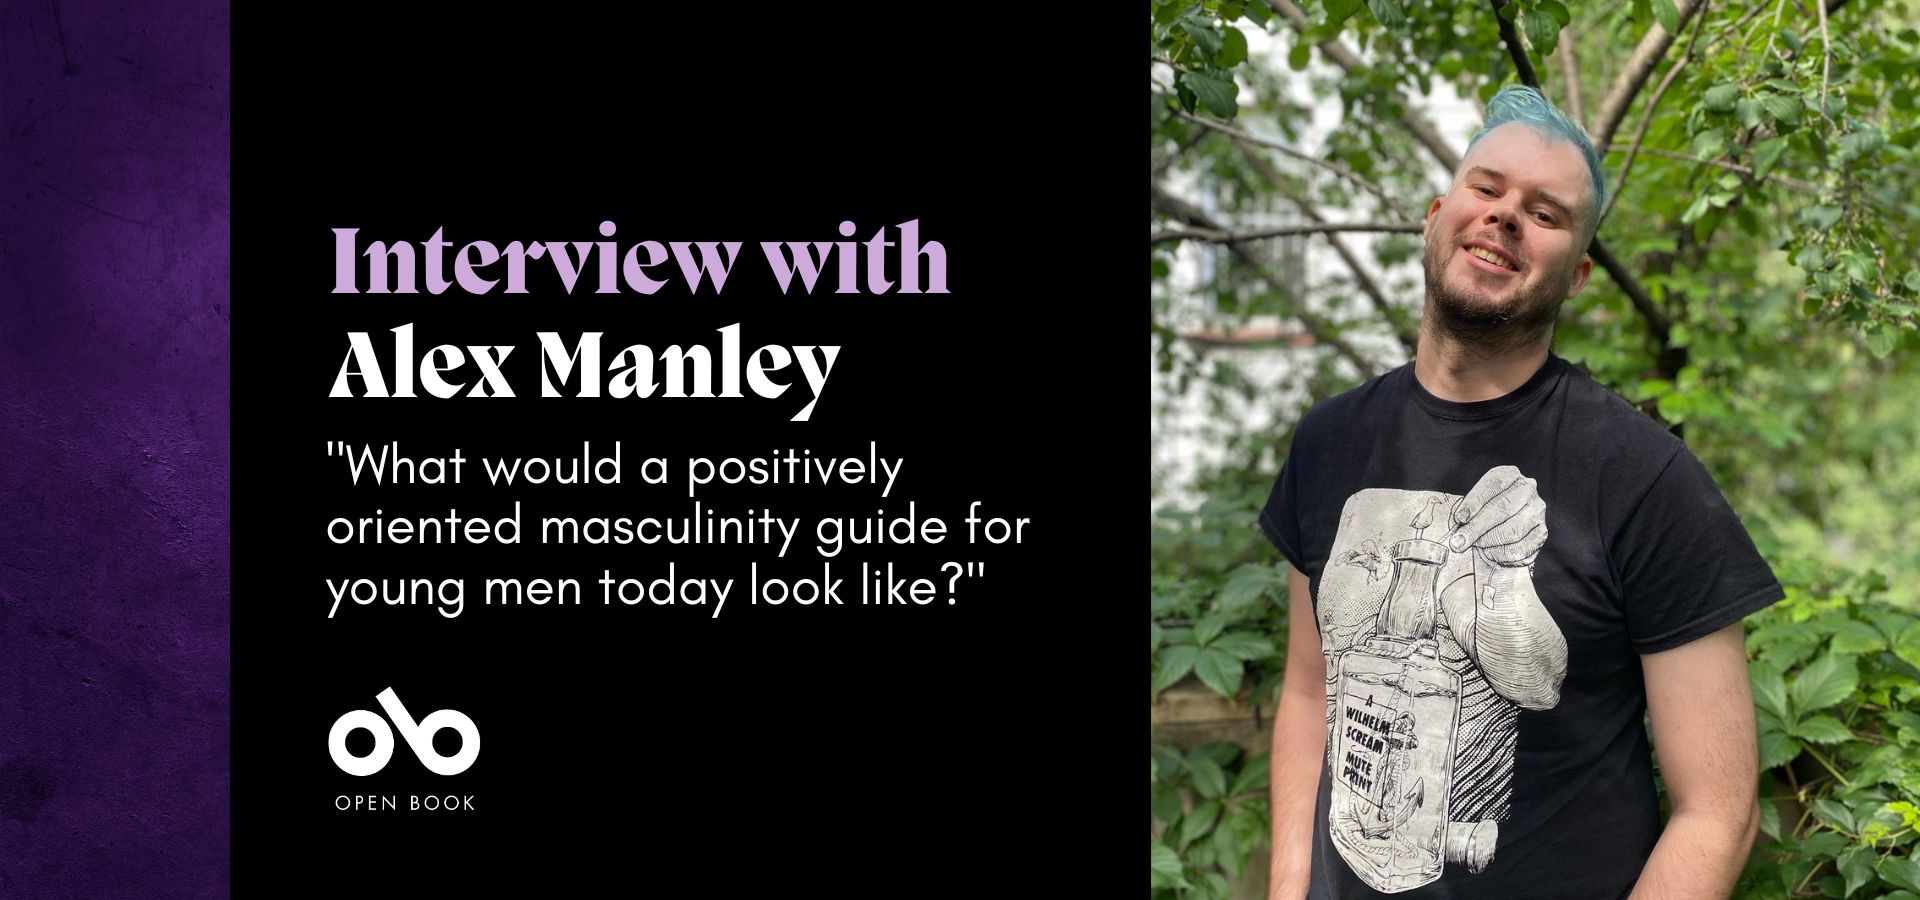 Purple and black banner image with photo of author Alex Manley and text reading "Interview with Alex Manley. 'What would a positively oriented masculinity guide for young men today look like?'" Open Book logo bottom left